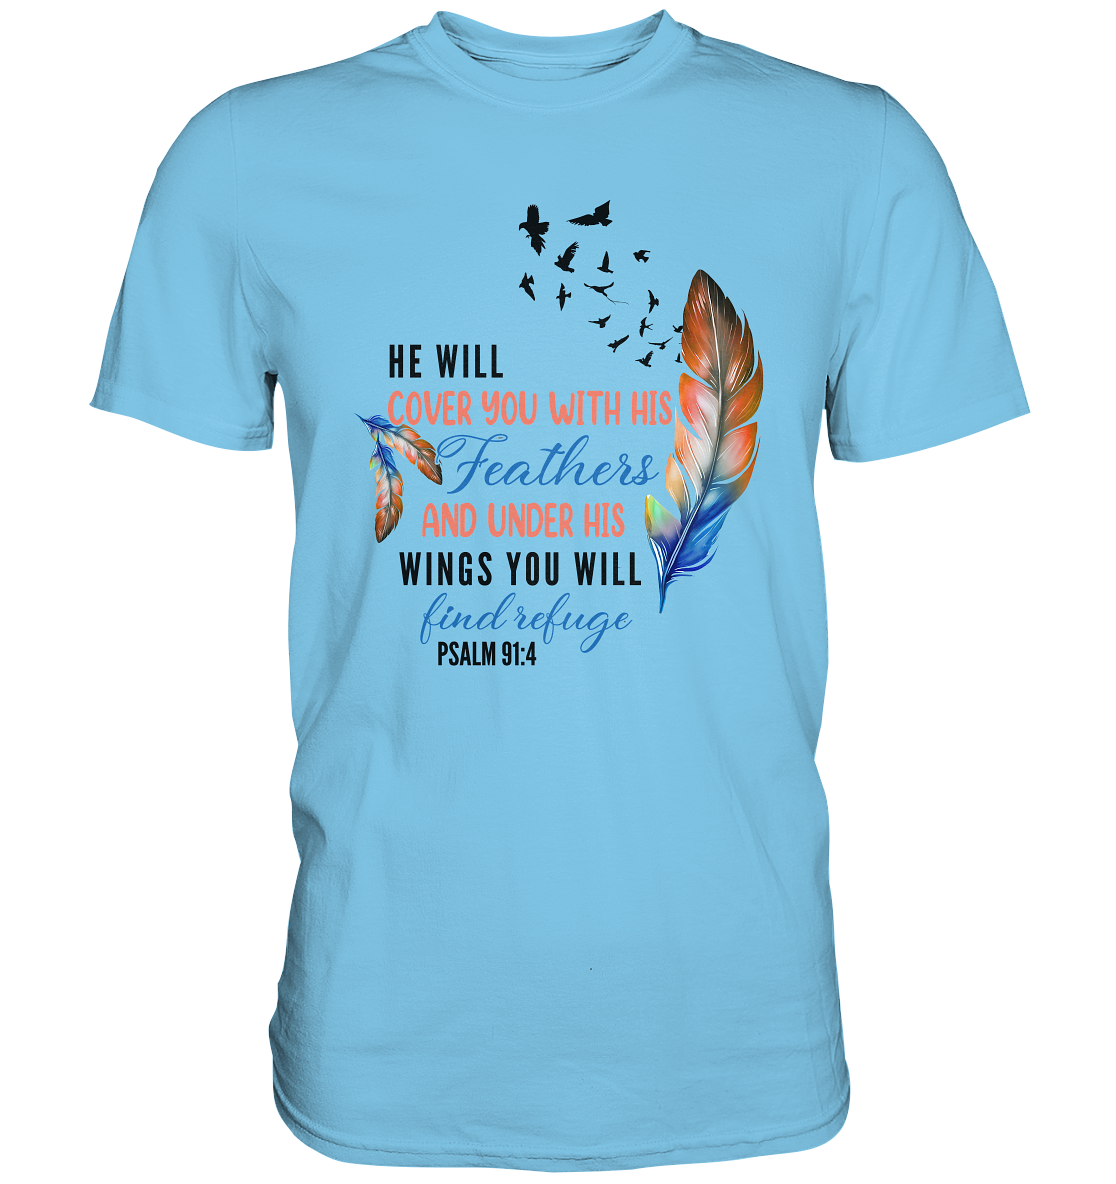 Psalm 91:4 - He will cover you with his Feathers - Premium Shirt